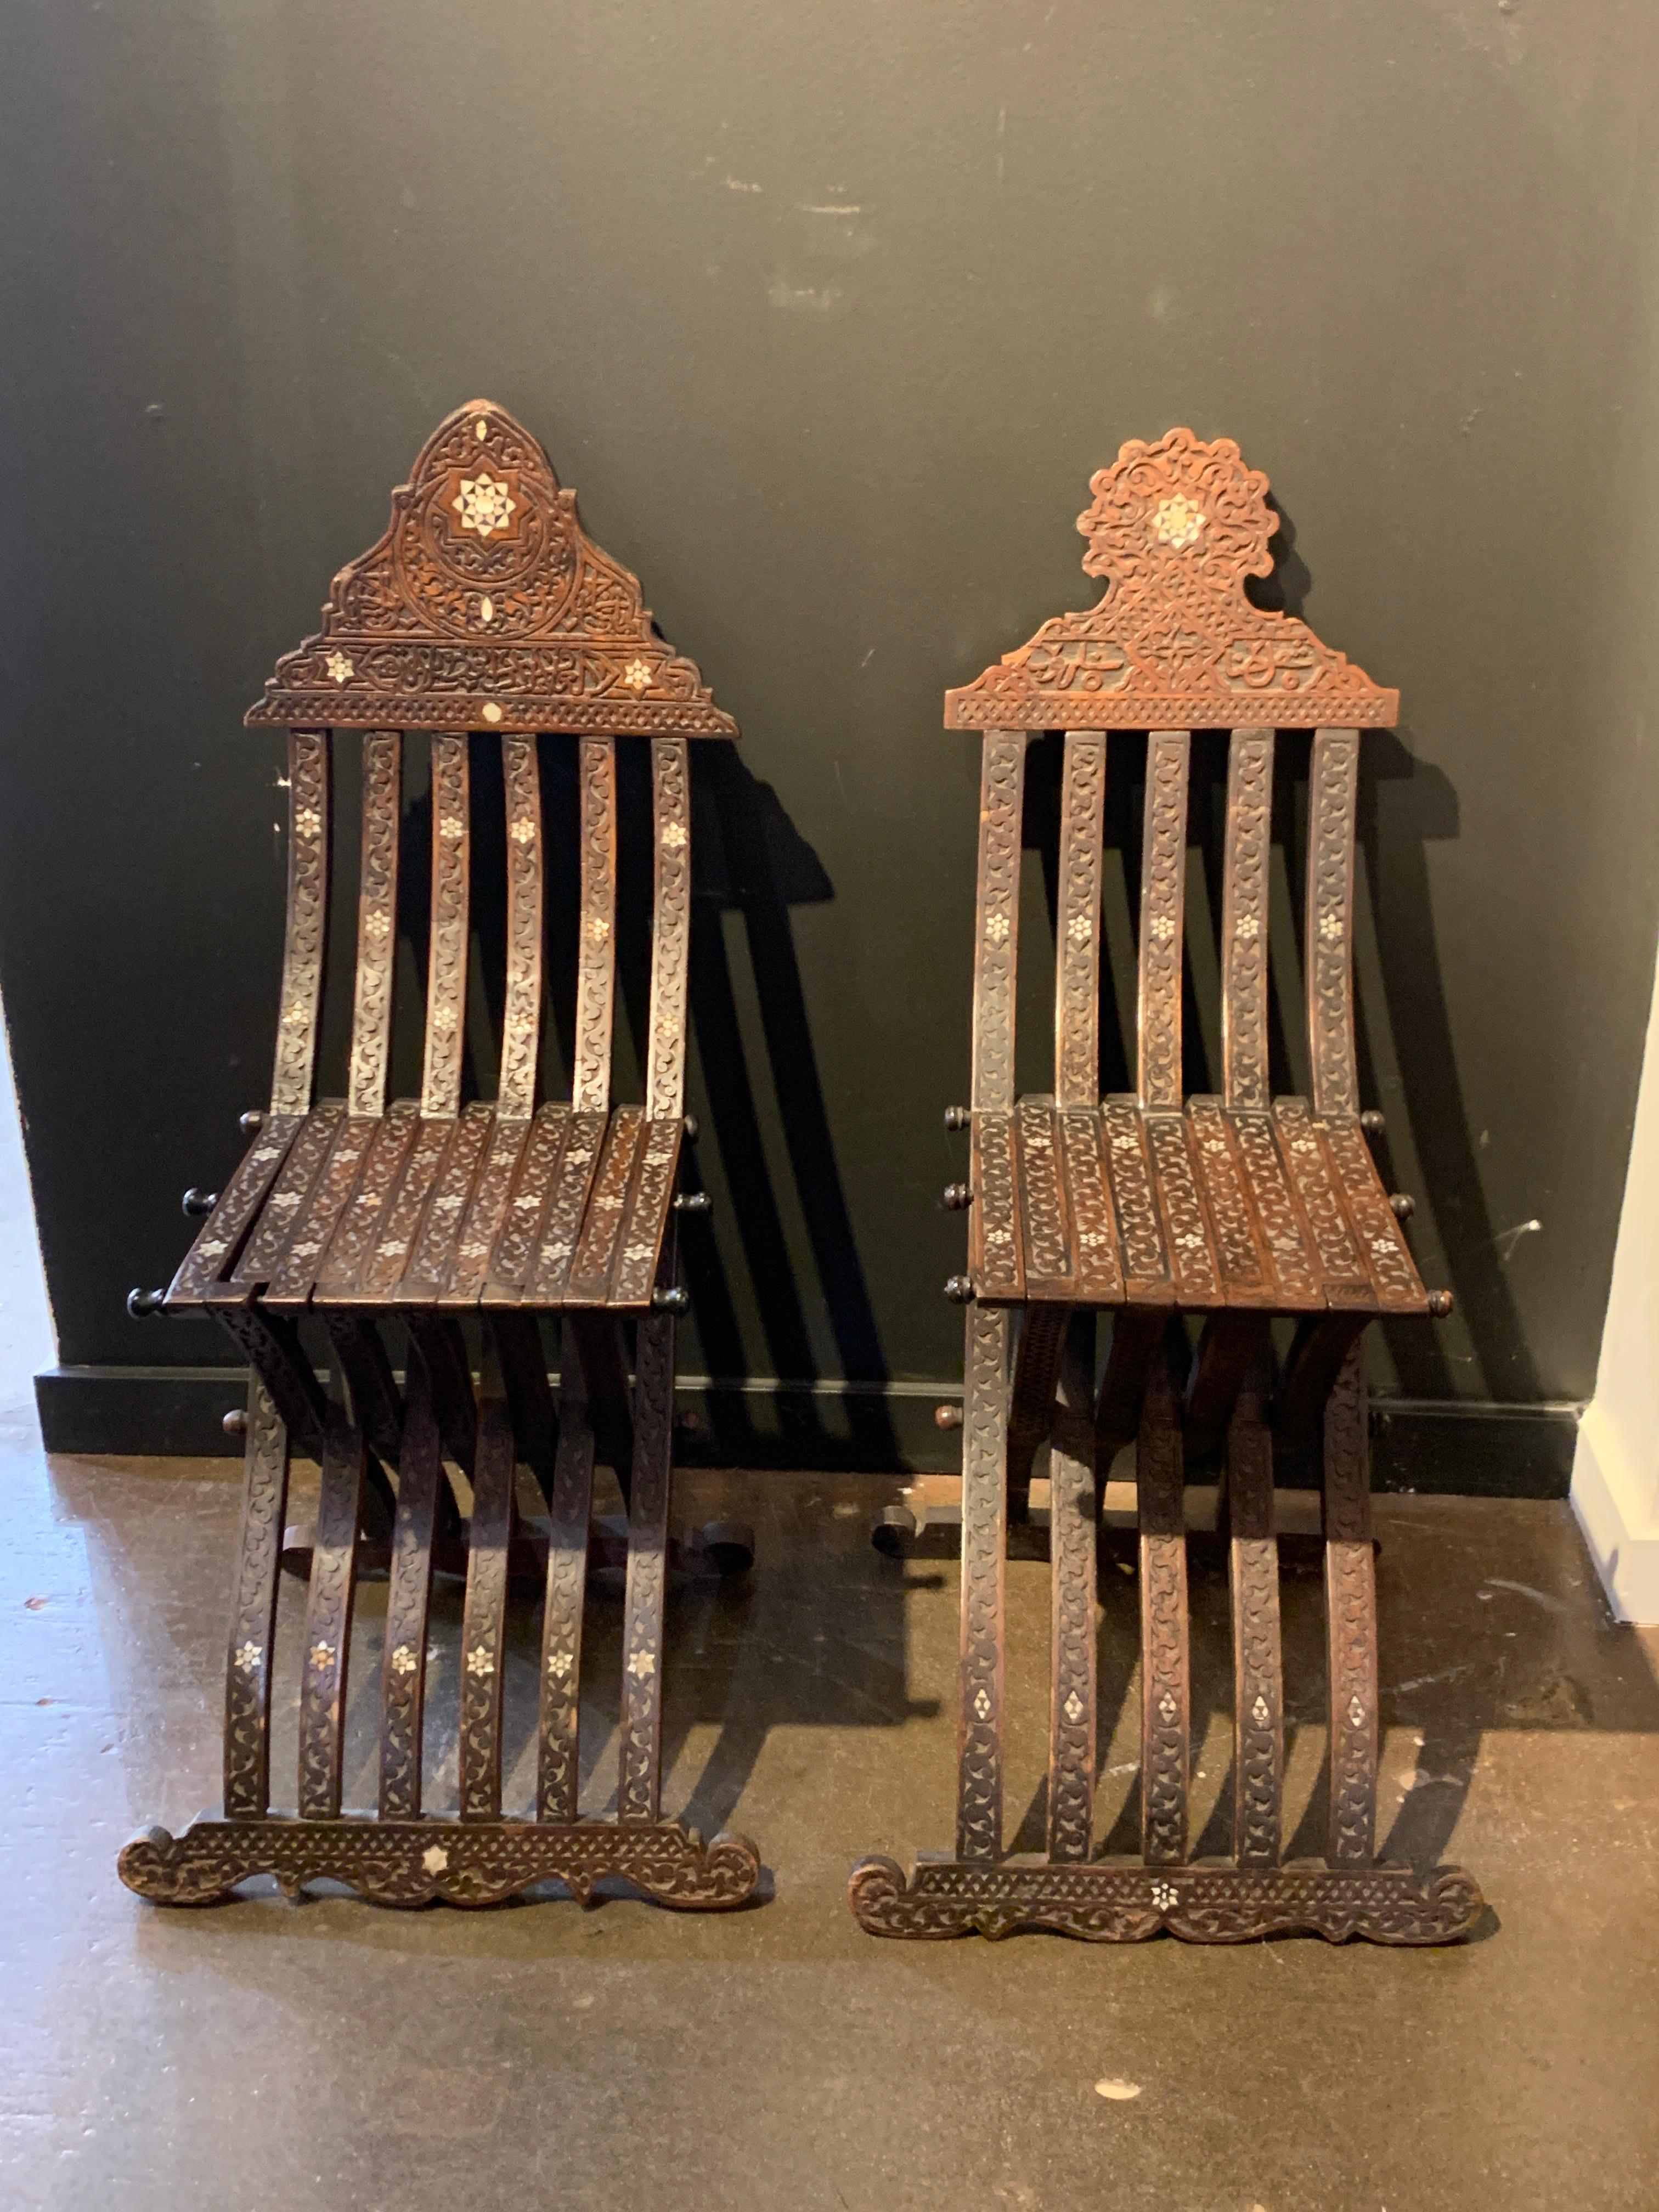 A classic and elegant near pair of antique Syrian carved walnut folding scribes chairs with shell and bone inlay, late 19th century, Syria.

The chairs of hand carved walnut in a folding slat design and set on curule legs. The wood carved with an